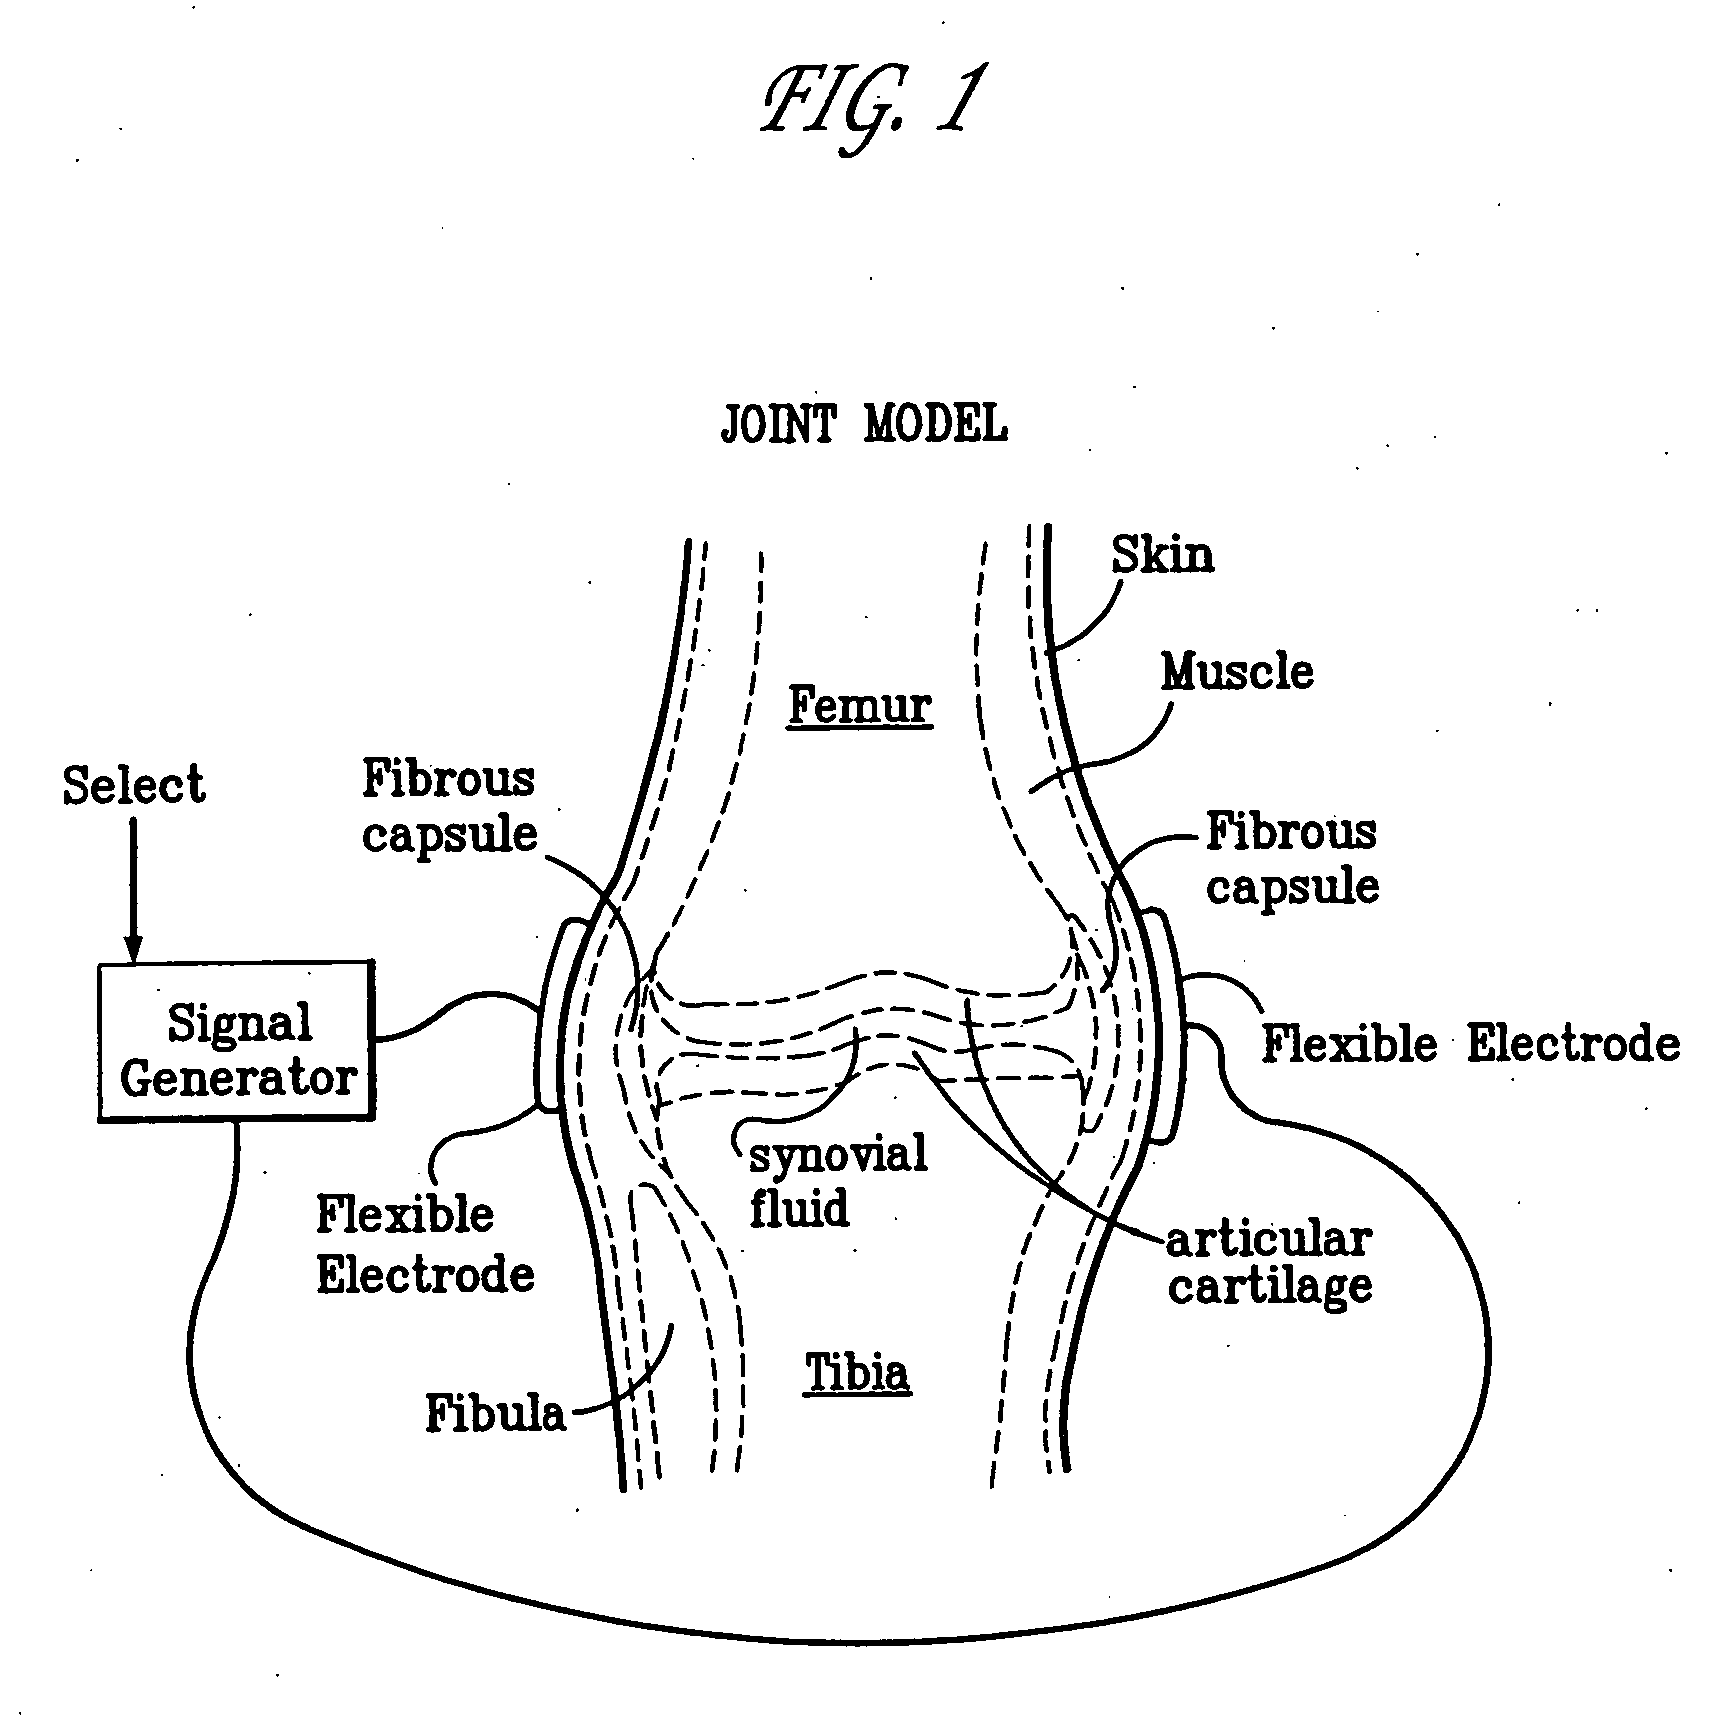 Method and device for treating osteoarthritis, cartilage disease, defects and injuries in the human knee